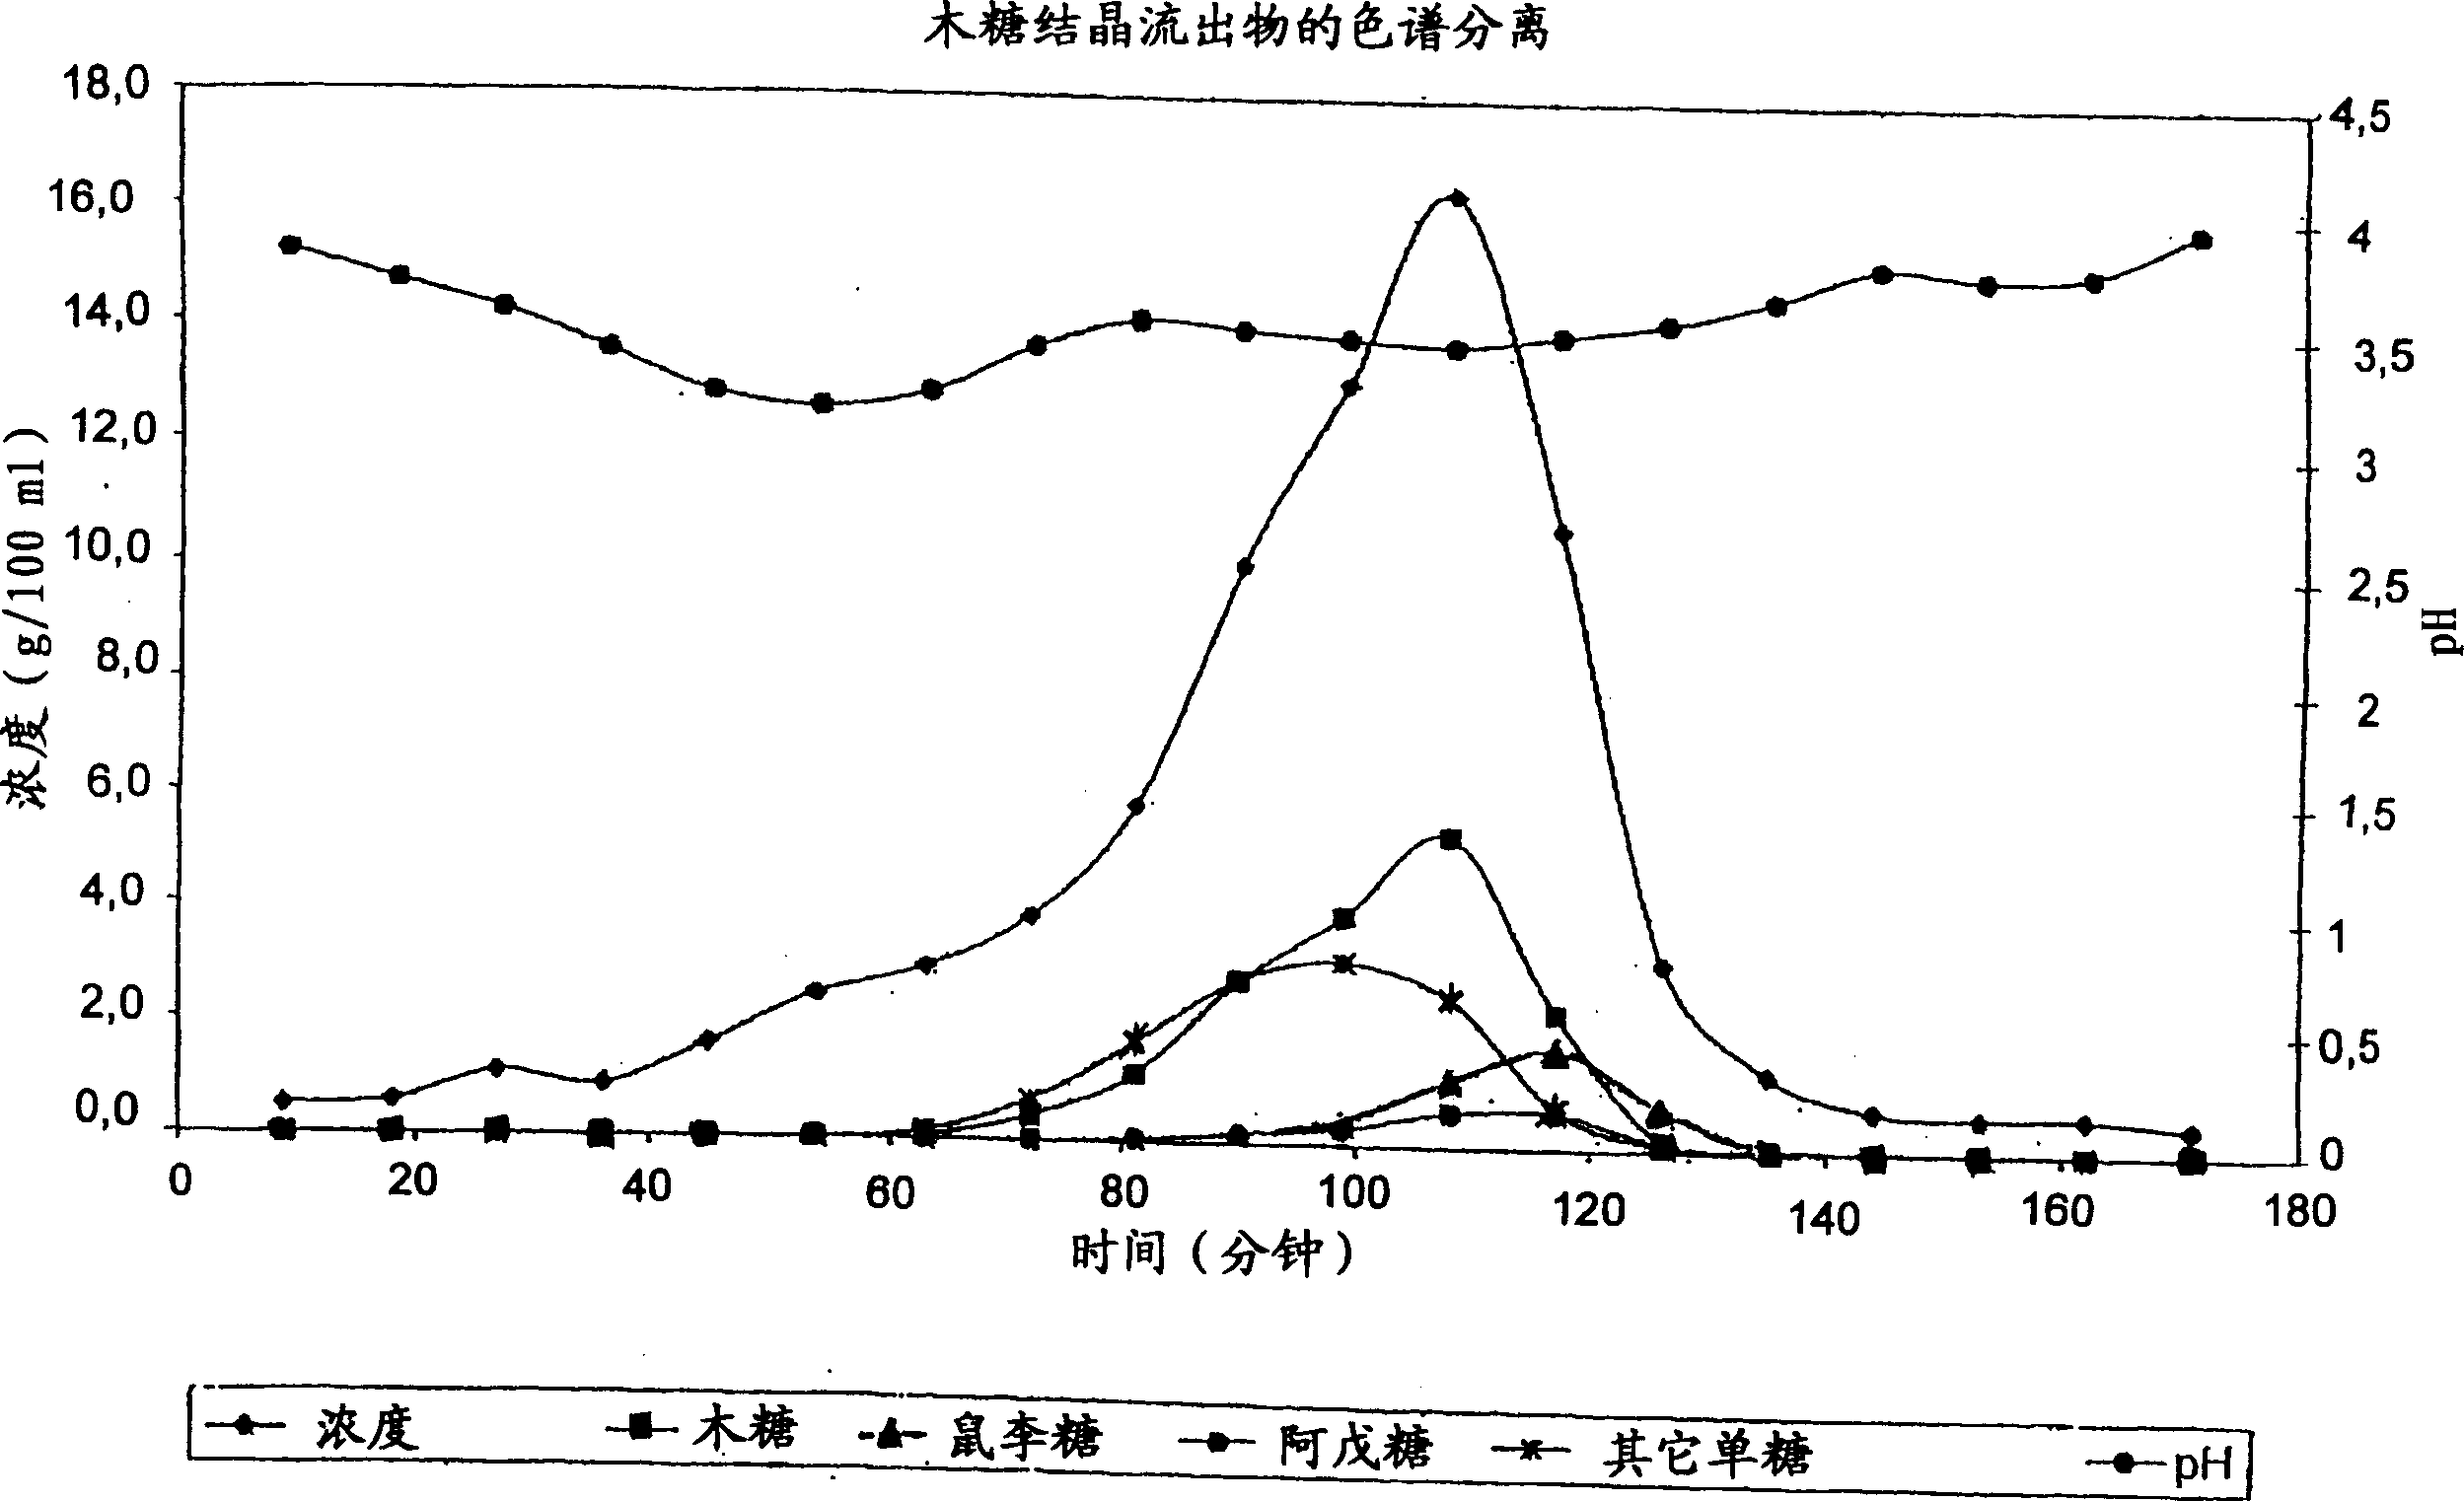 Method for recovering monosaccharide from solution using weakly acid cation exchange resin for chromatographic separation